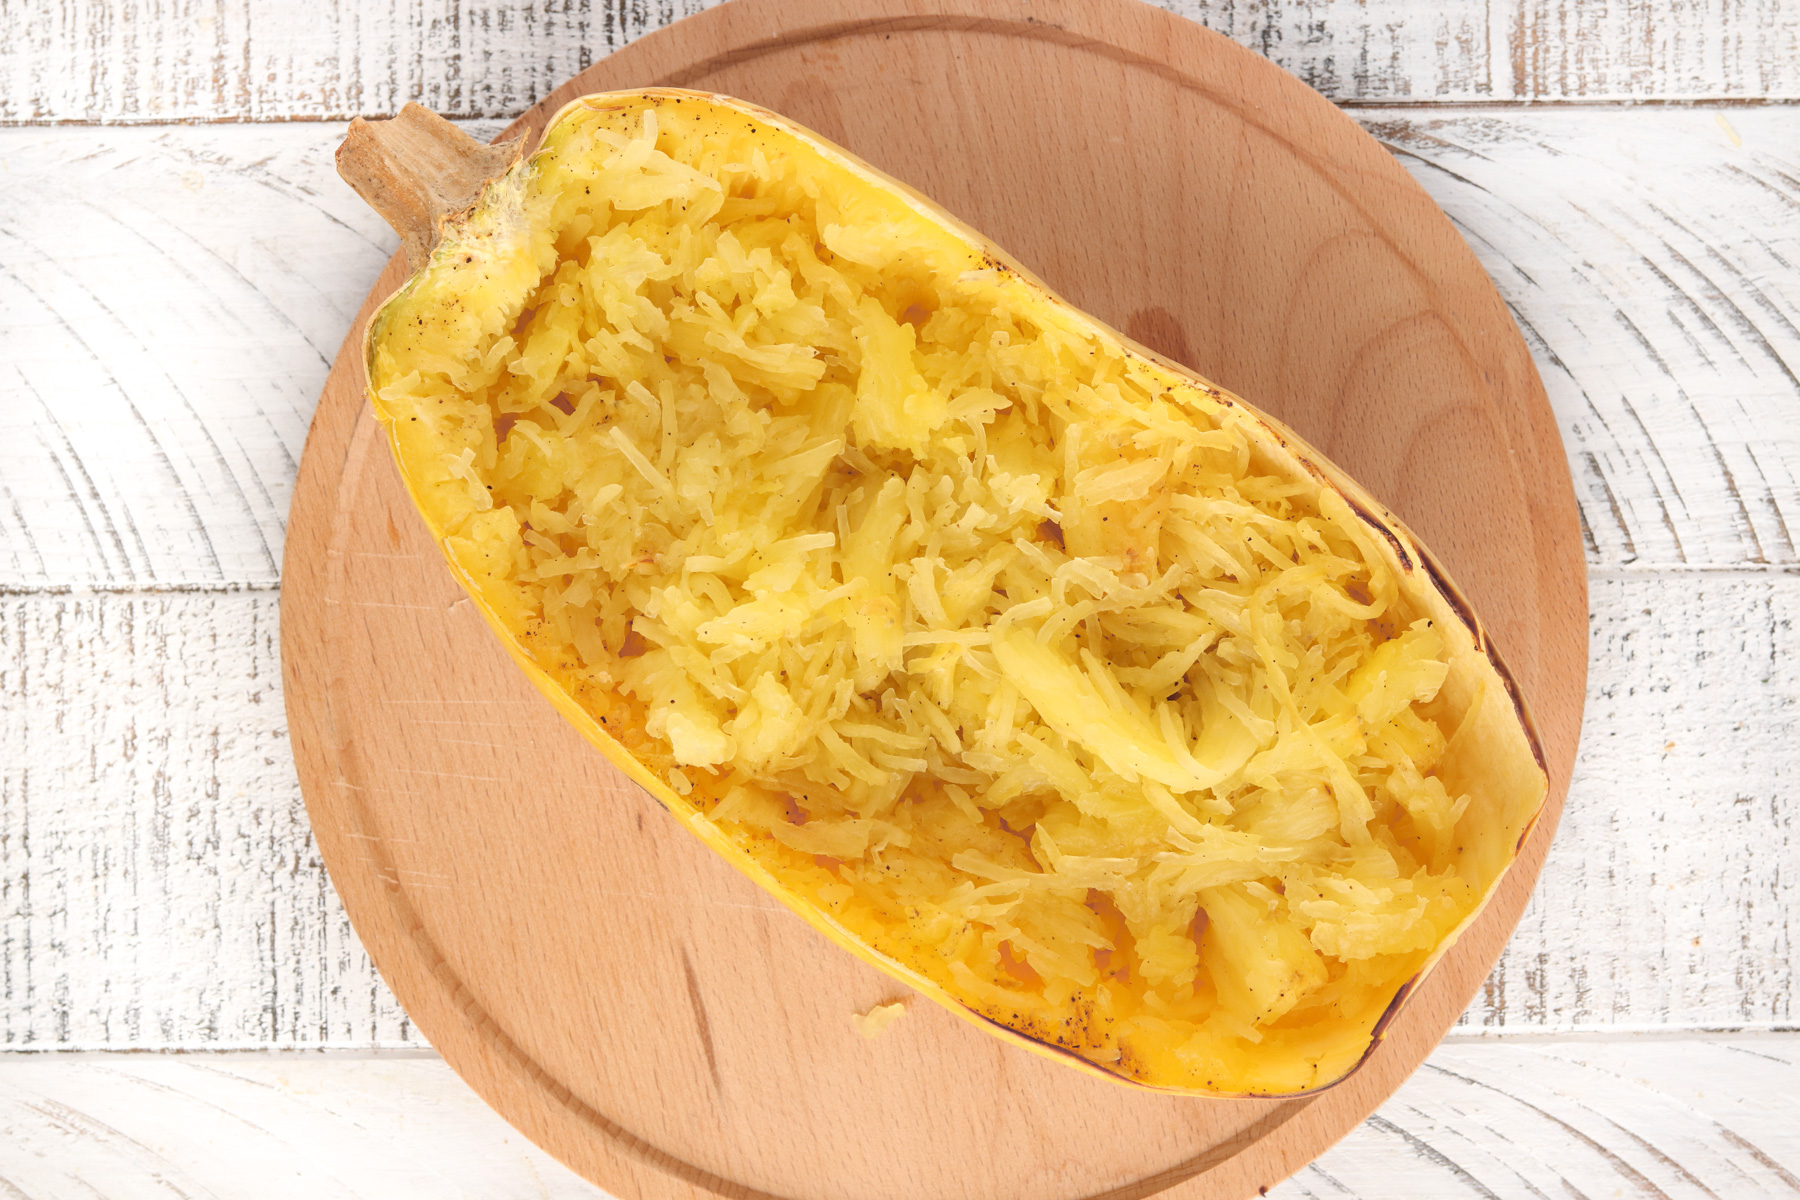 Spaghetti squash sliced in half and shredded with a fork. 